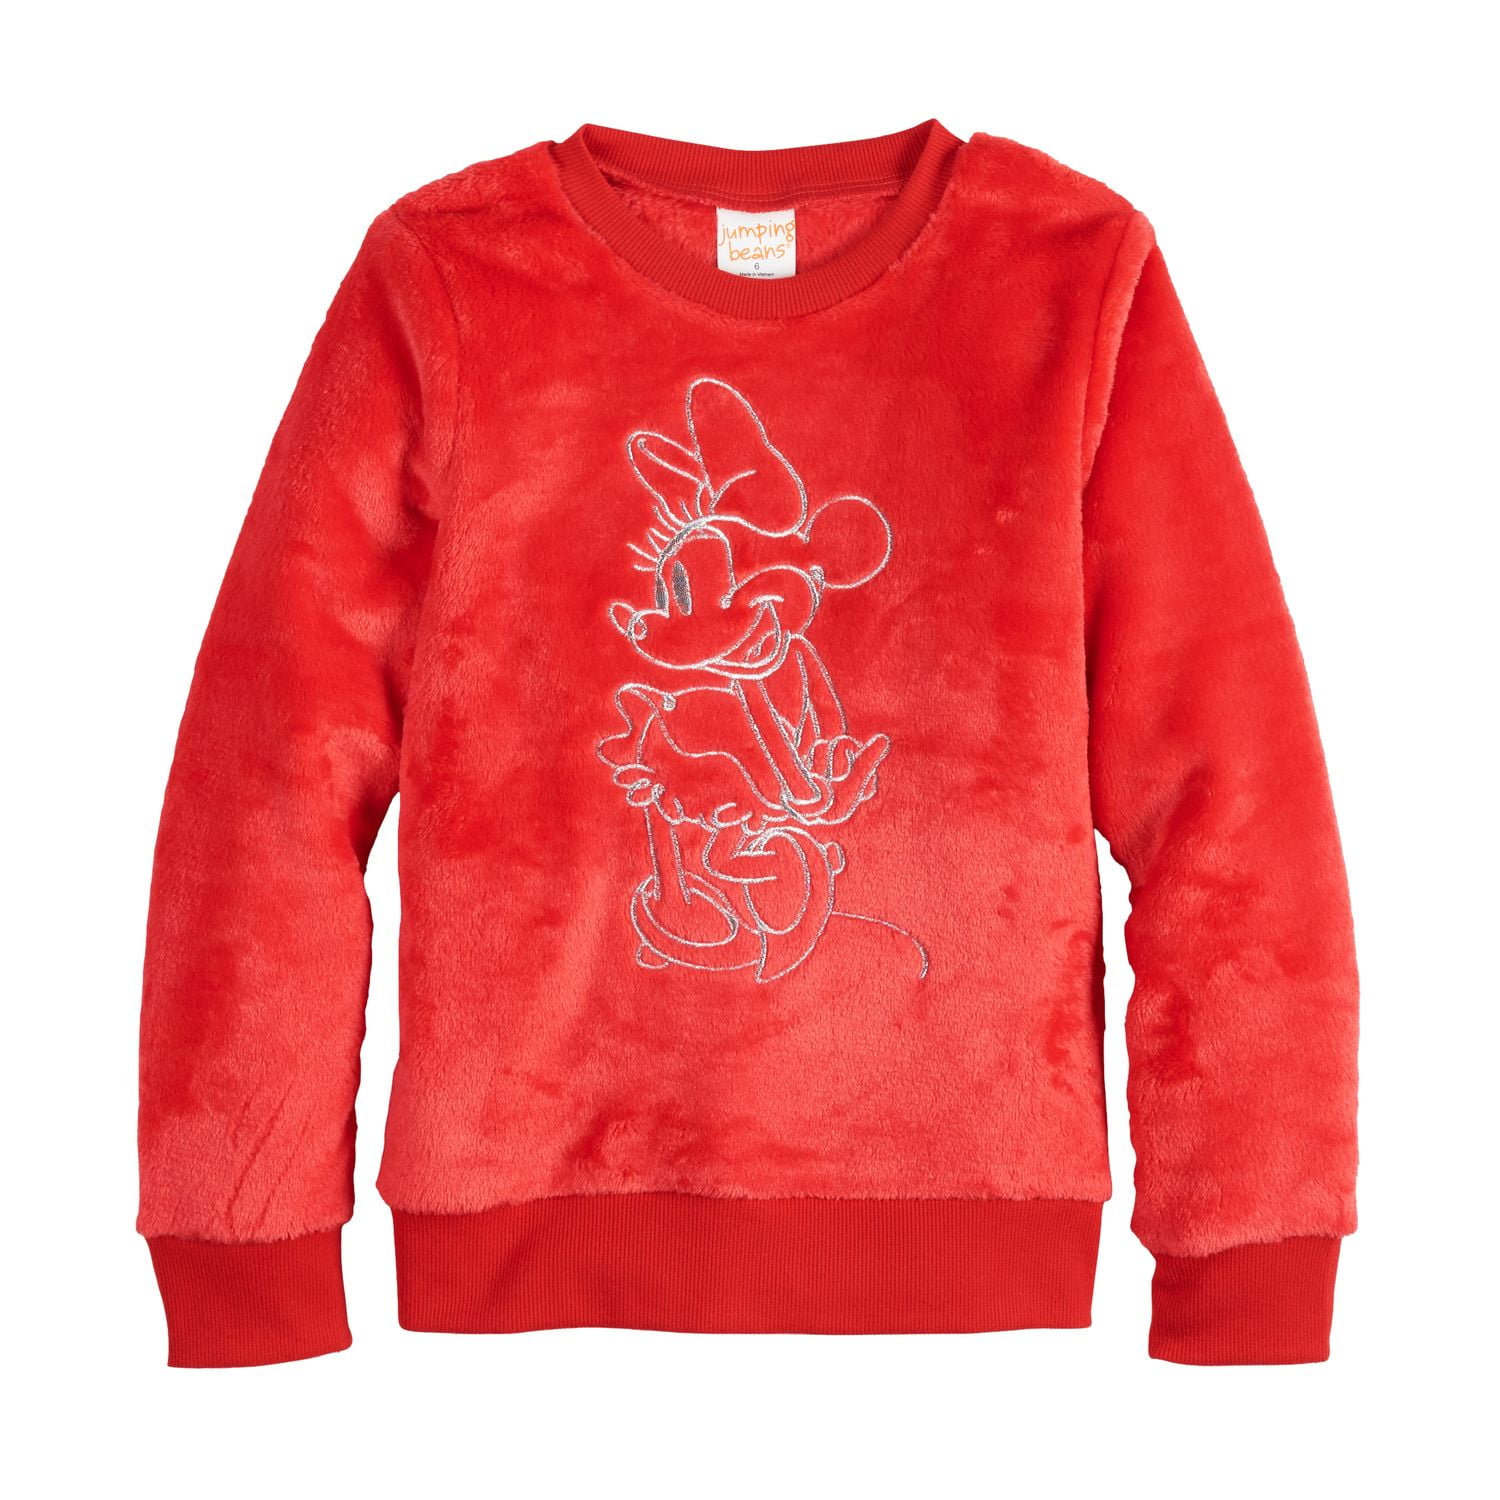 Disney's Minnie Mouse Girls 4-12 Plush Sweatshirt by Jumping Beans , Girl's